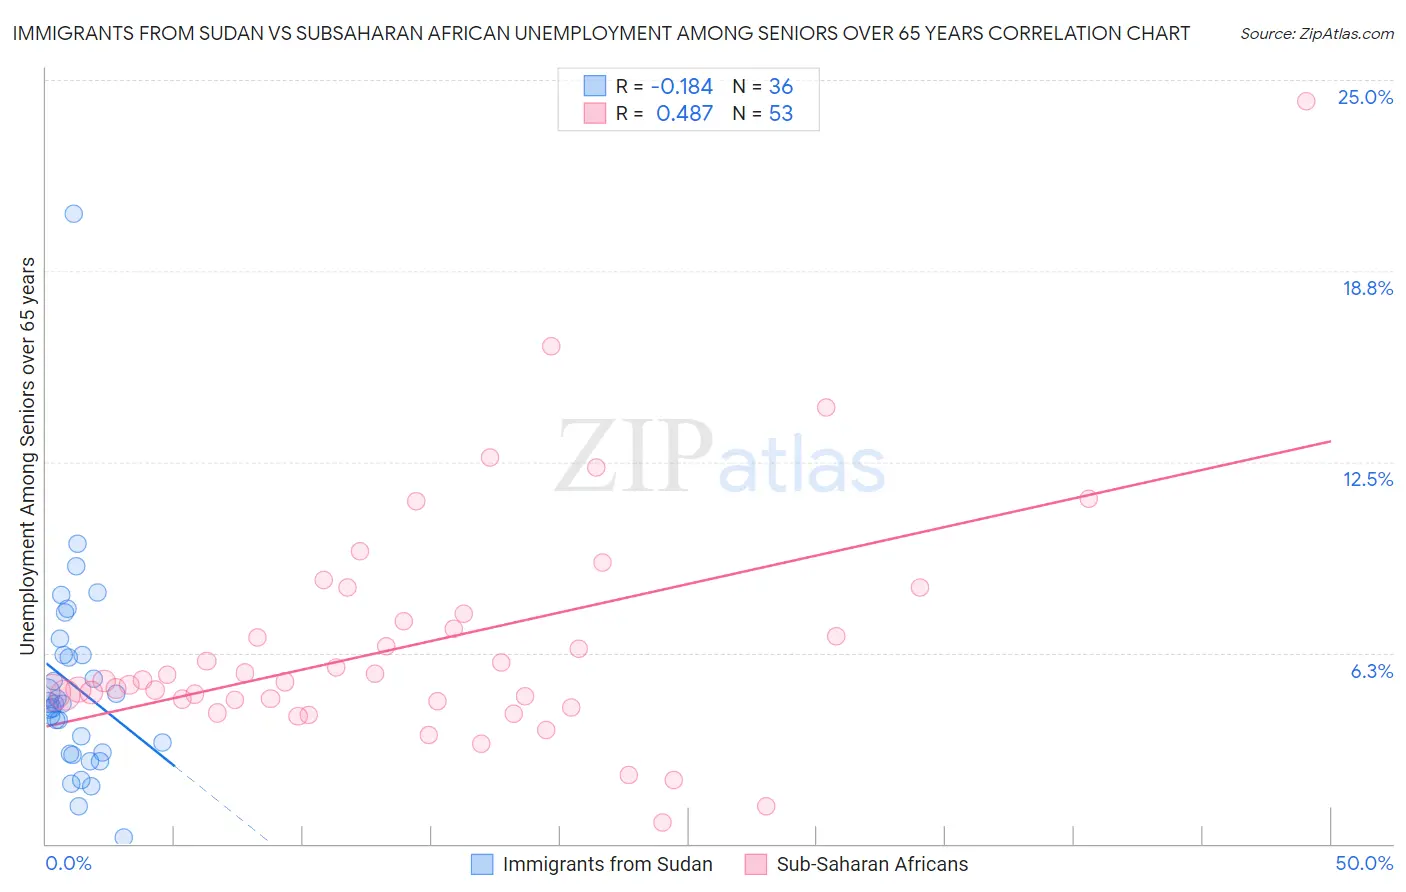 Immigrants from Sudan vs Subsaharan African Unemployment Among Seniors over 65 years